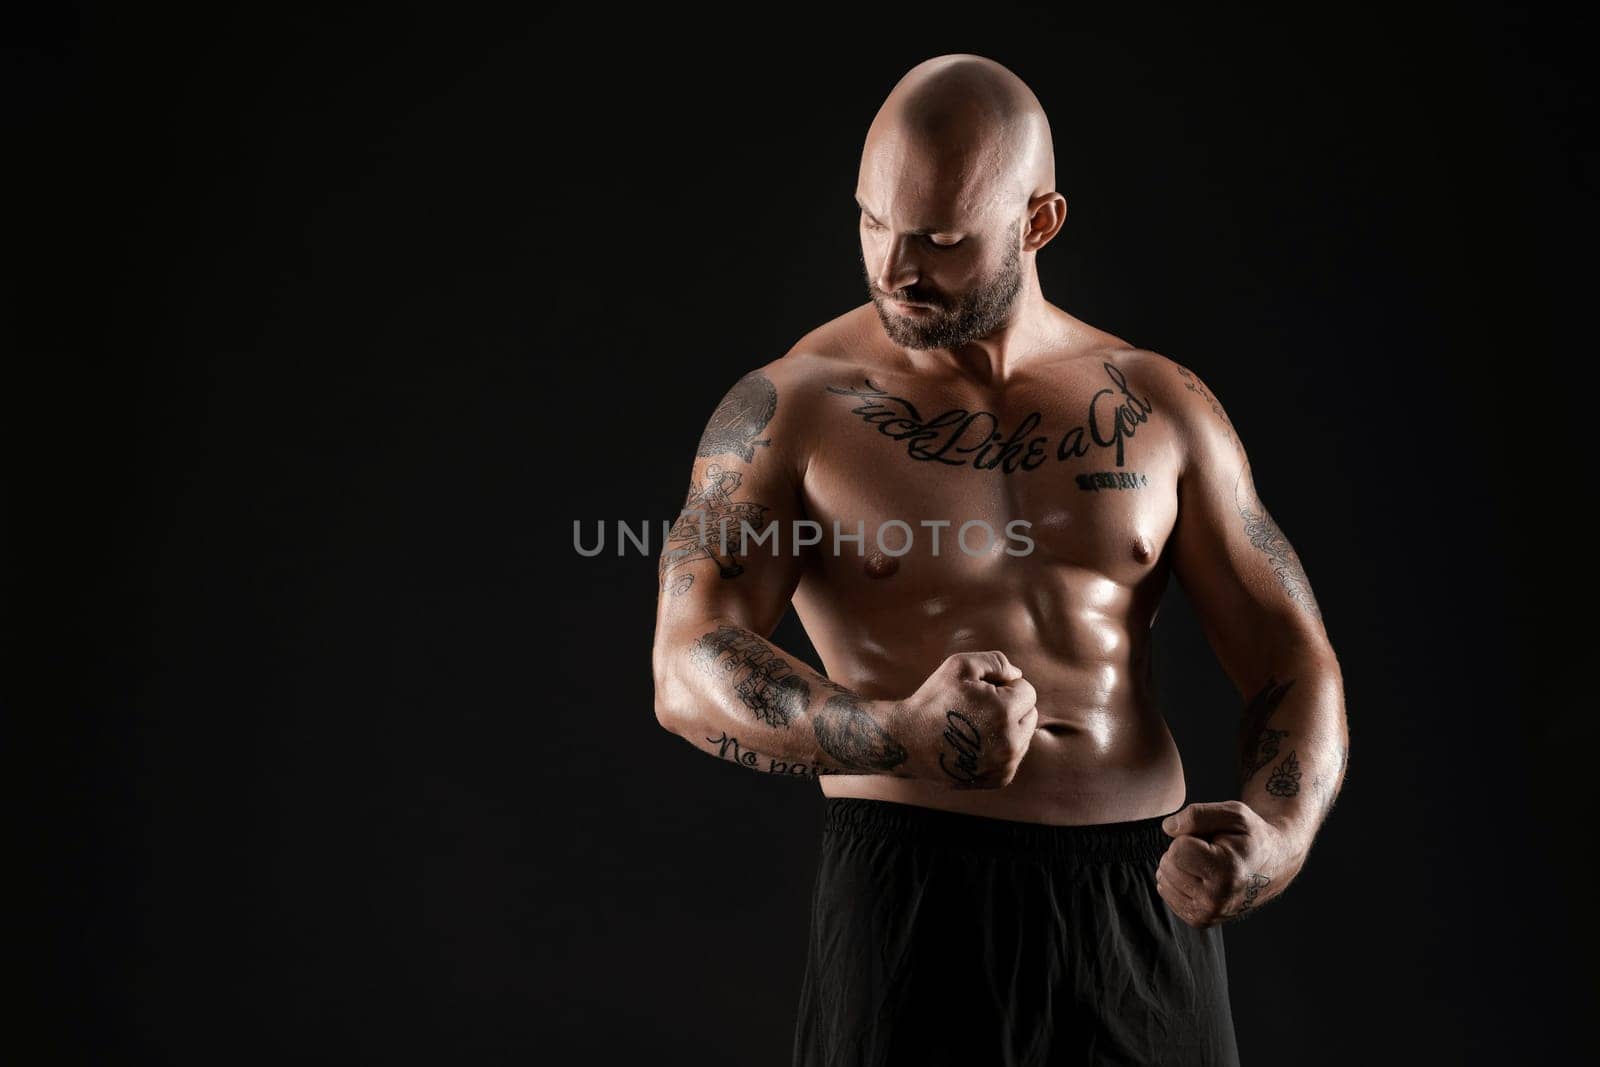 Handsome bald, bearded, tattooed person in black shorts is demonstating his muscles and looking at it while posing against a black background. Chic muscular body, fitness, gym, healthy lifestyle concept. Close-up portrait.